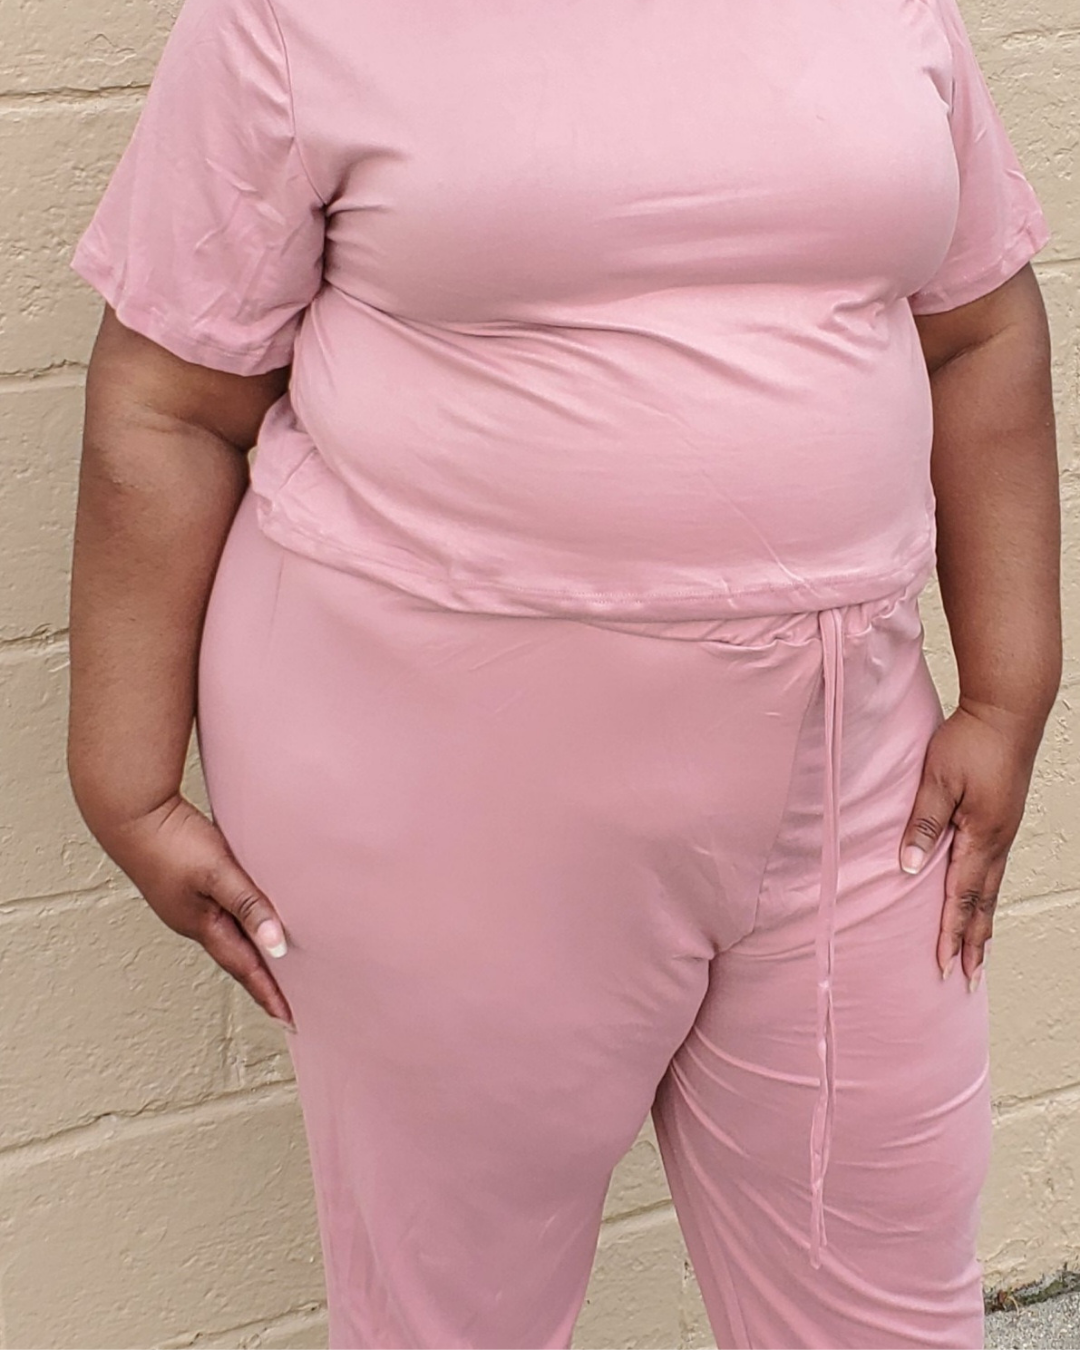 fan favorite. 1x-3x pink soft material 2 pc short sleeve shirt and loose-fitting pains with a stretch. has a jogger look at the bottom of the pants